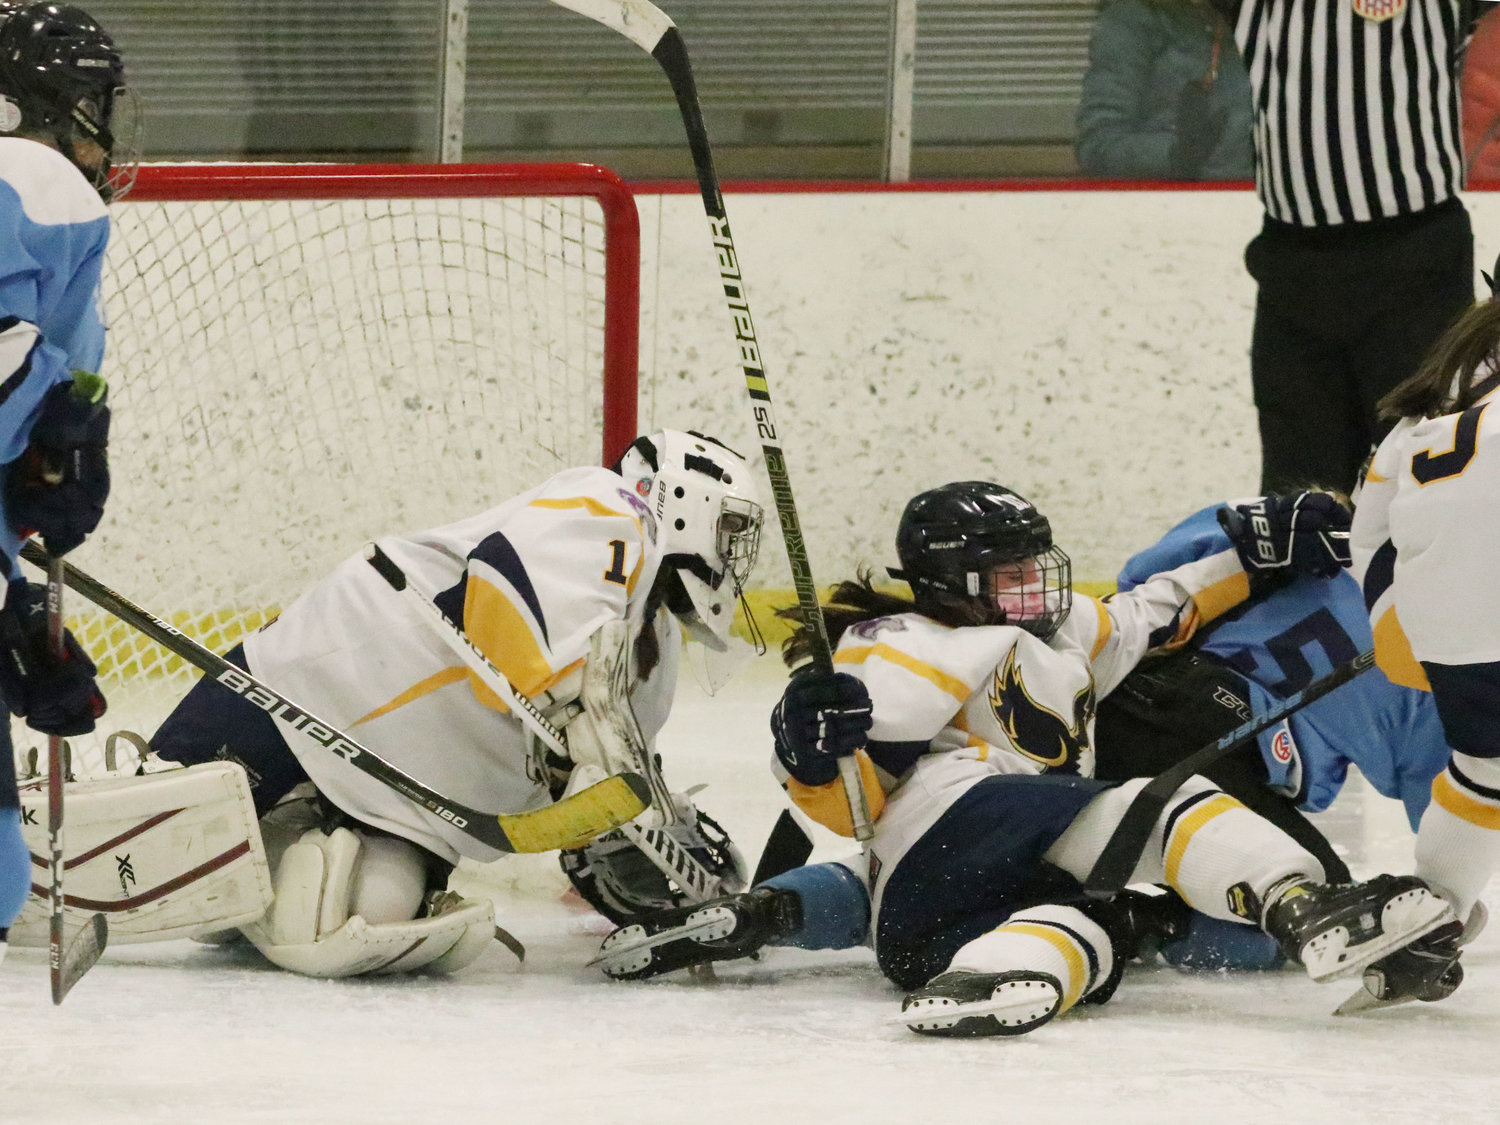 Goaltender Sara Turillo (left) and Malloy Cox slip to the ground attempting to keep the puck out of the East Bay goal in the third period of Game 2. Turillo was injured later in the game.